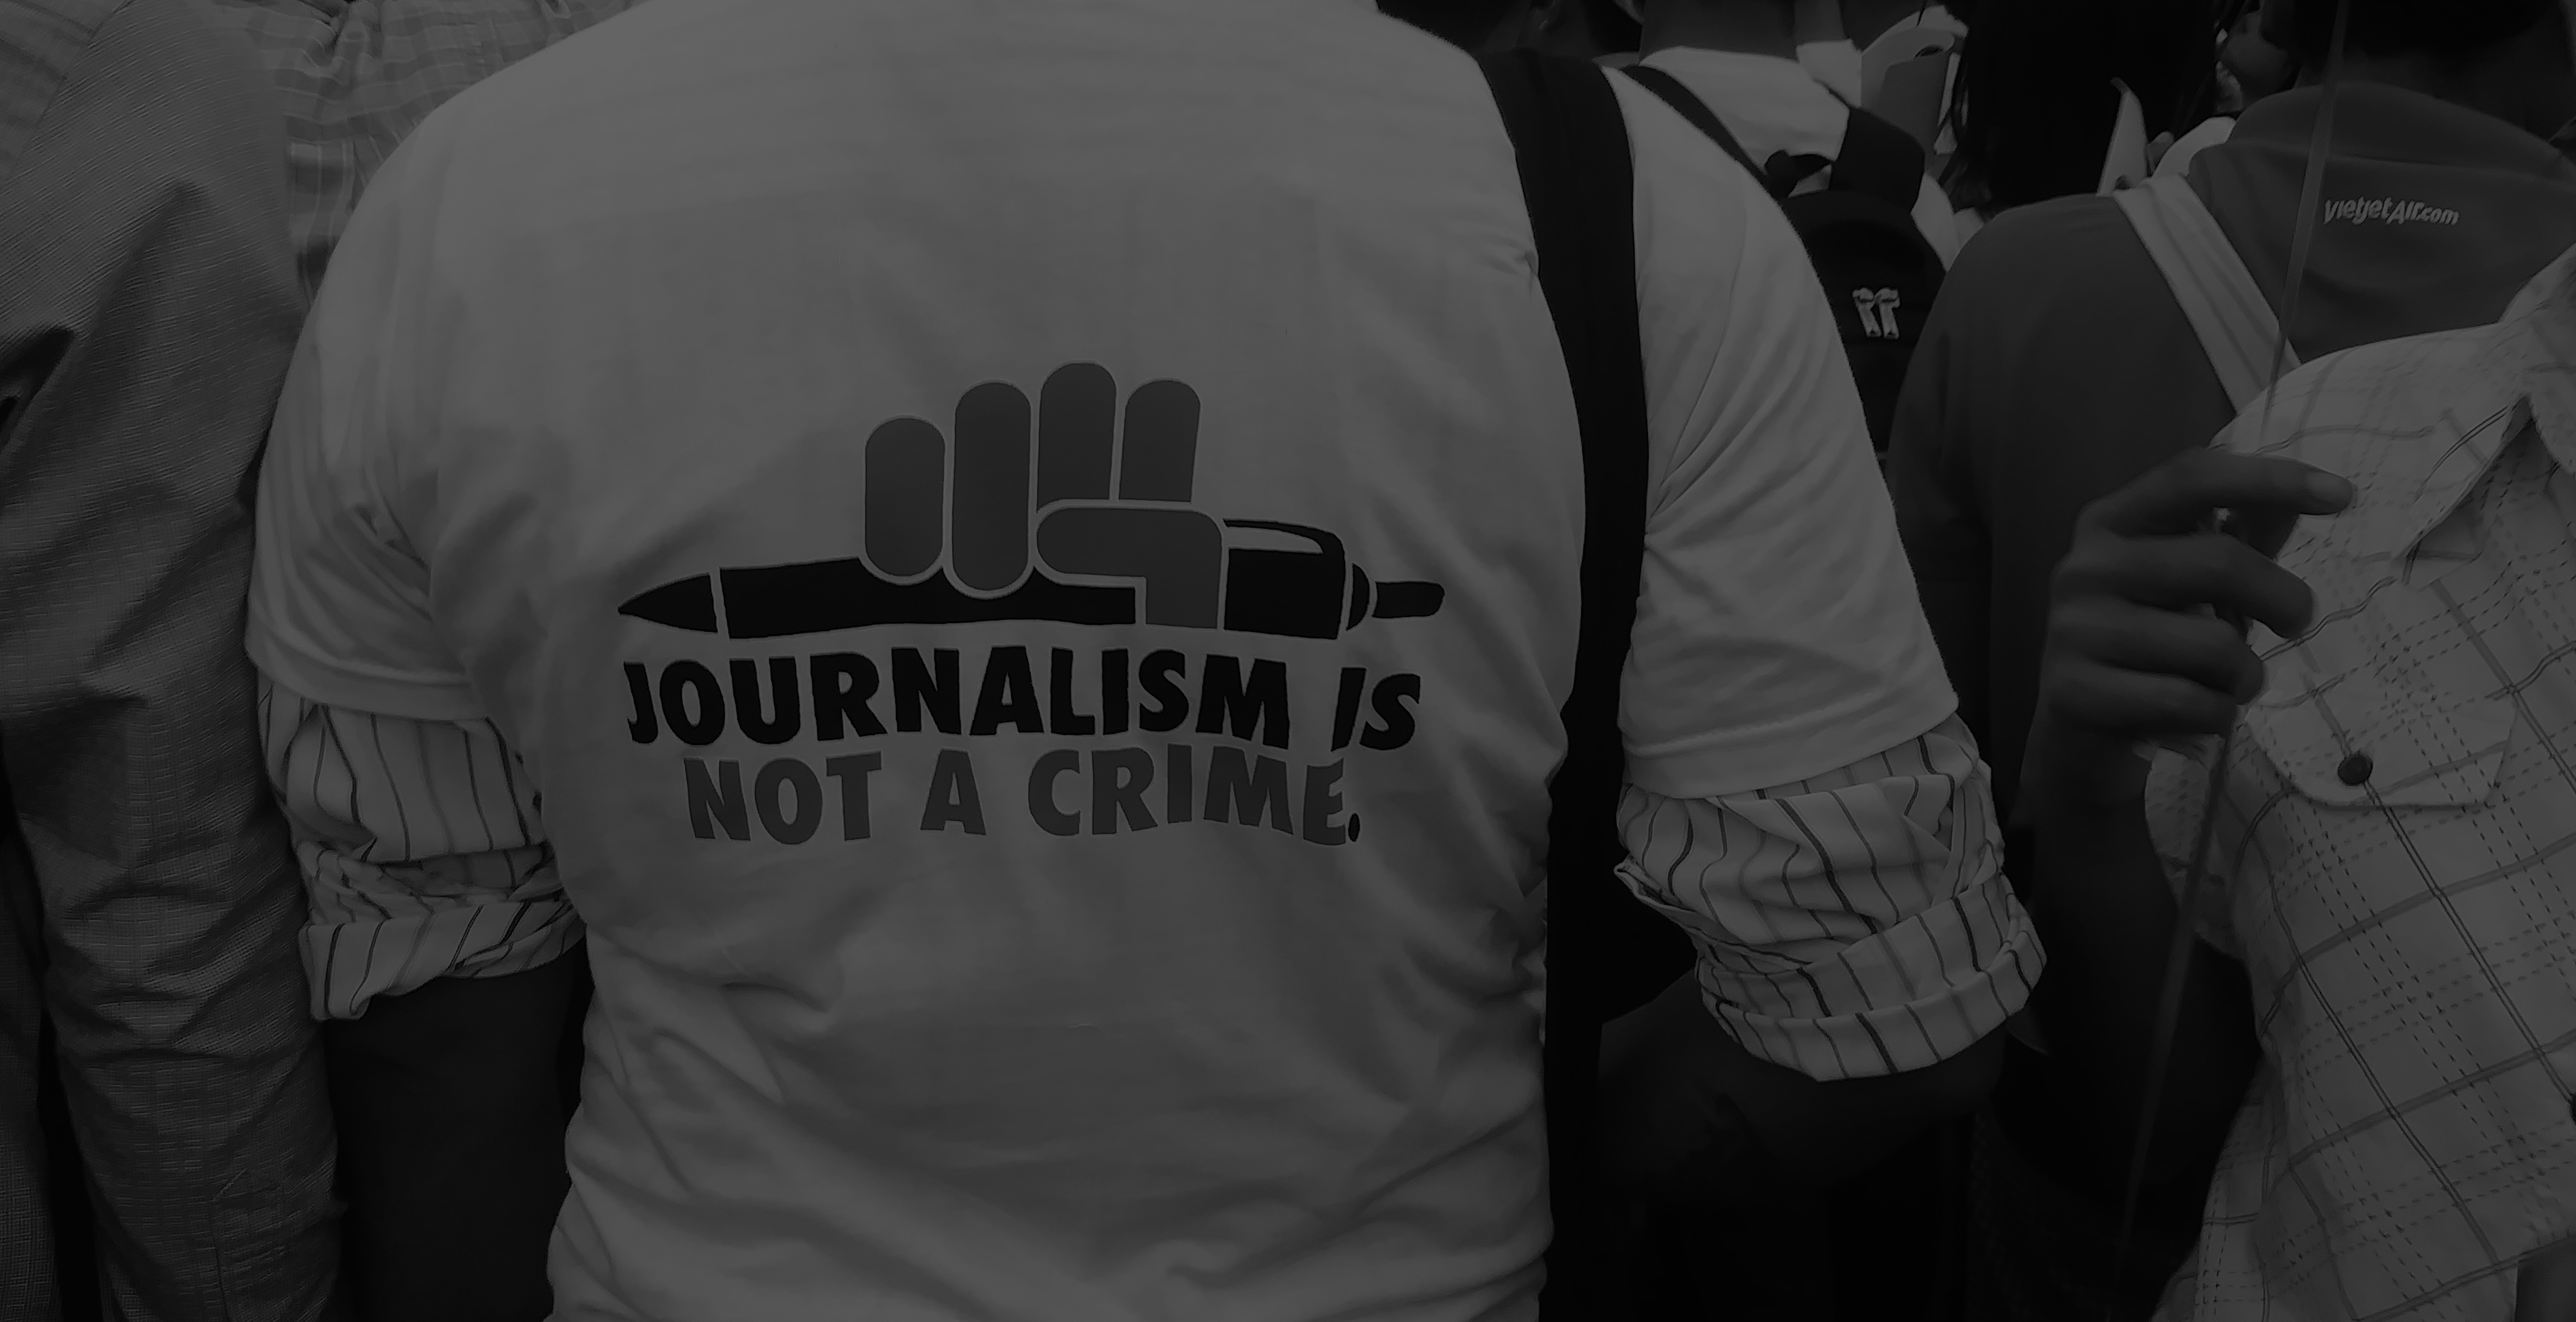 The back of a person in a crowd with a shirt that says Journalism is not a crime.